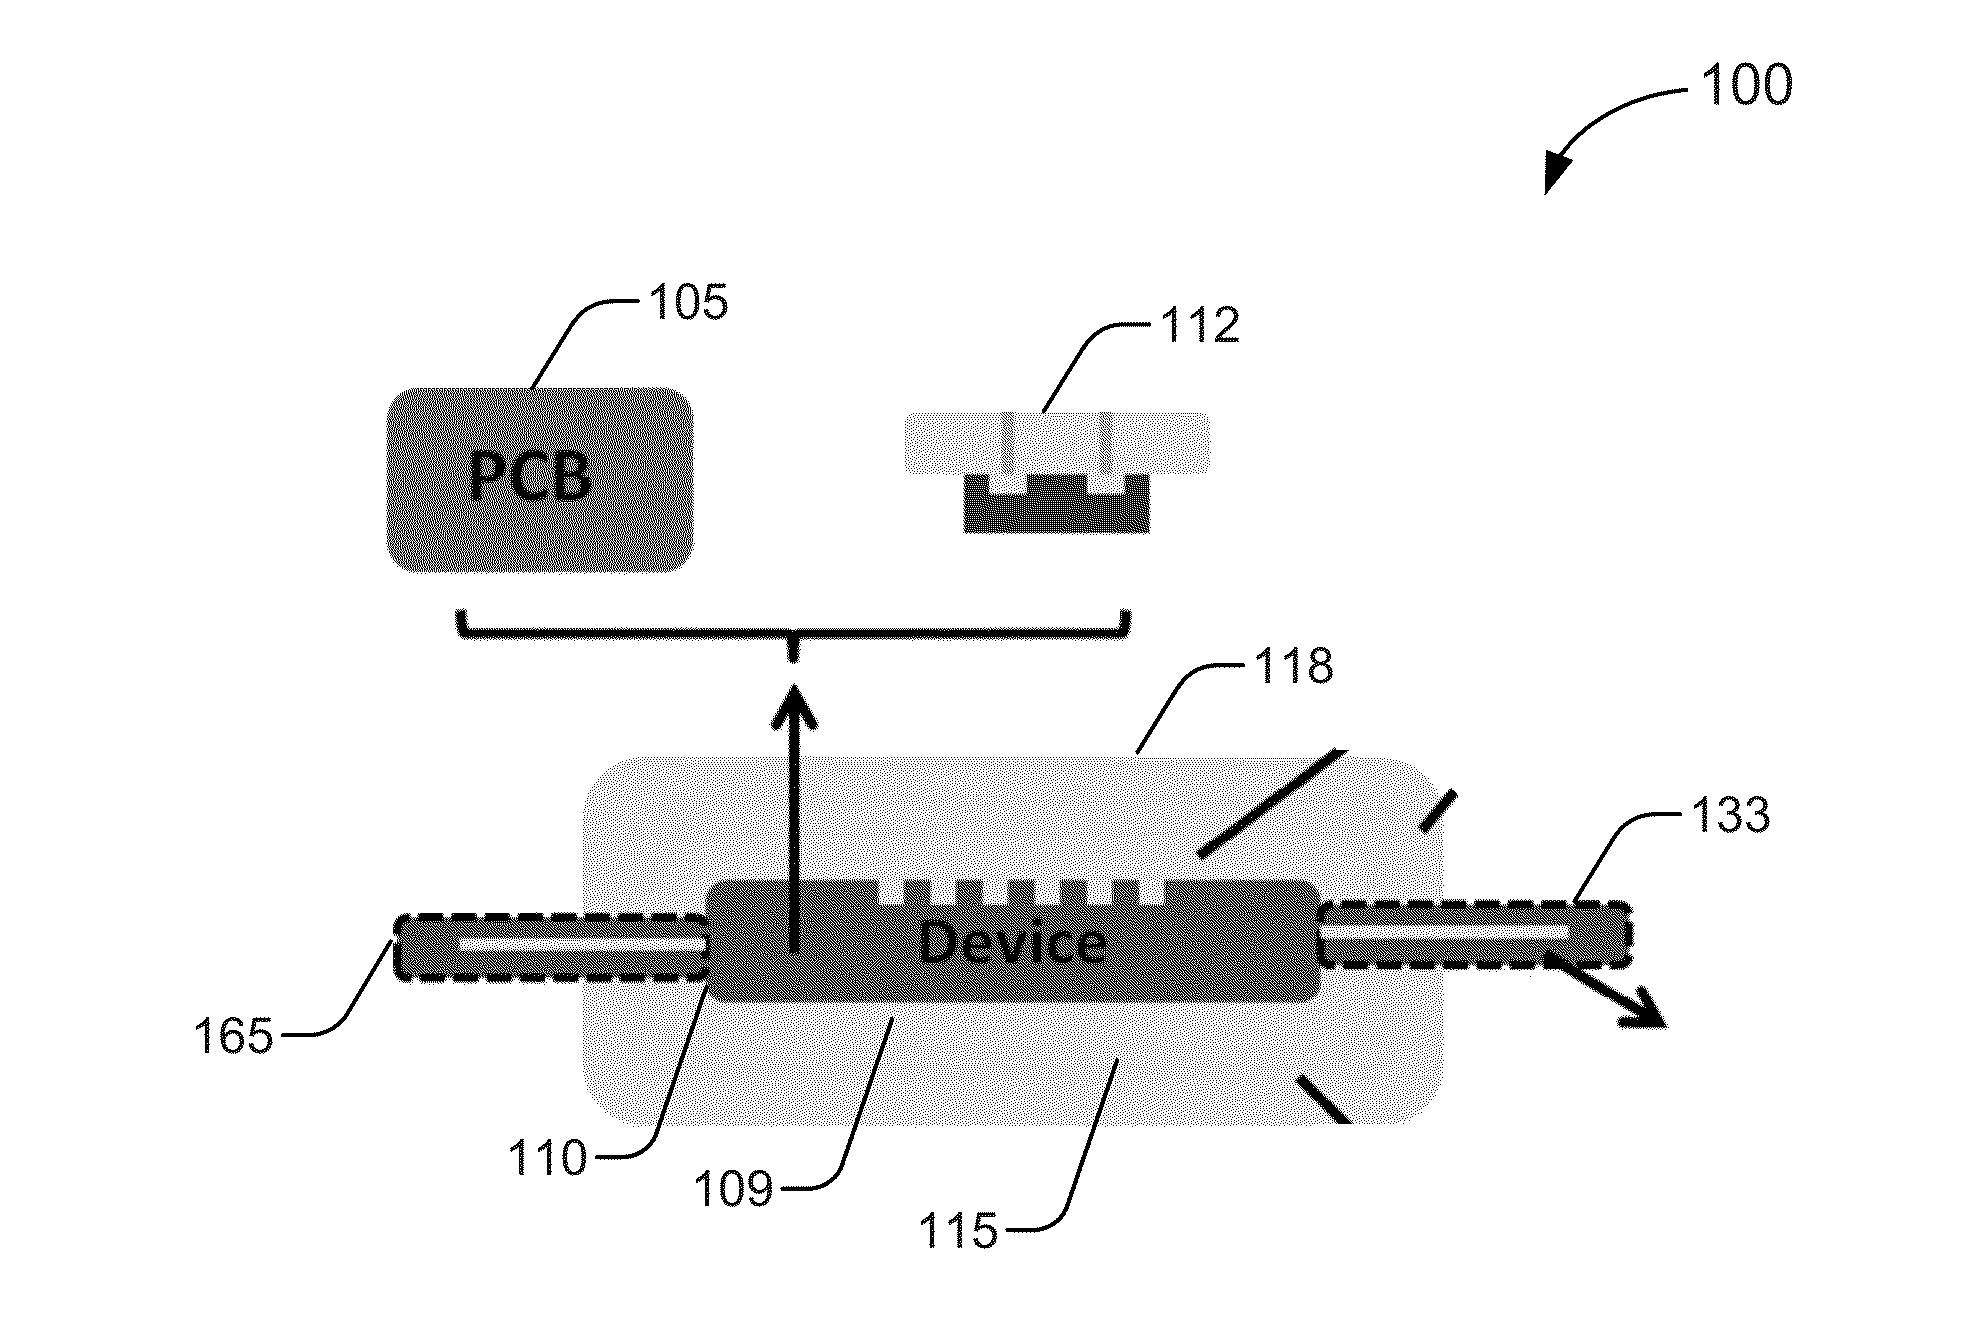 Multi-layer packaging scheme for implant electronics